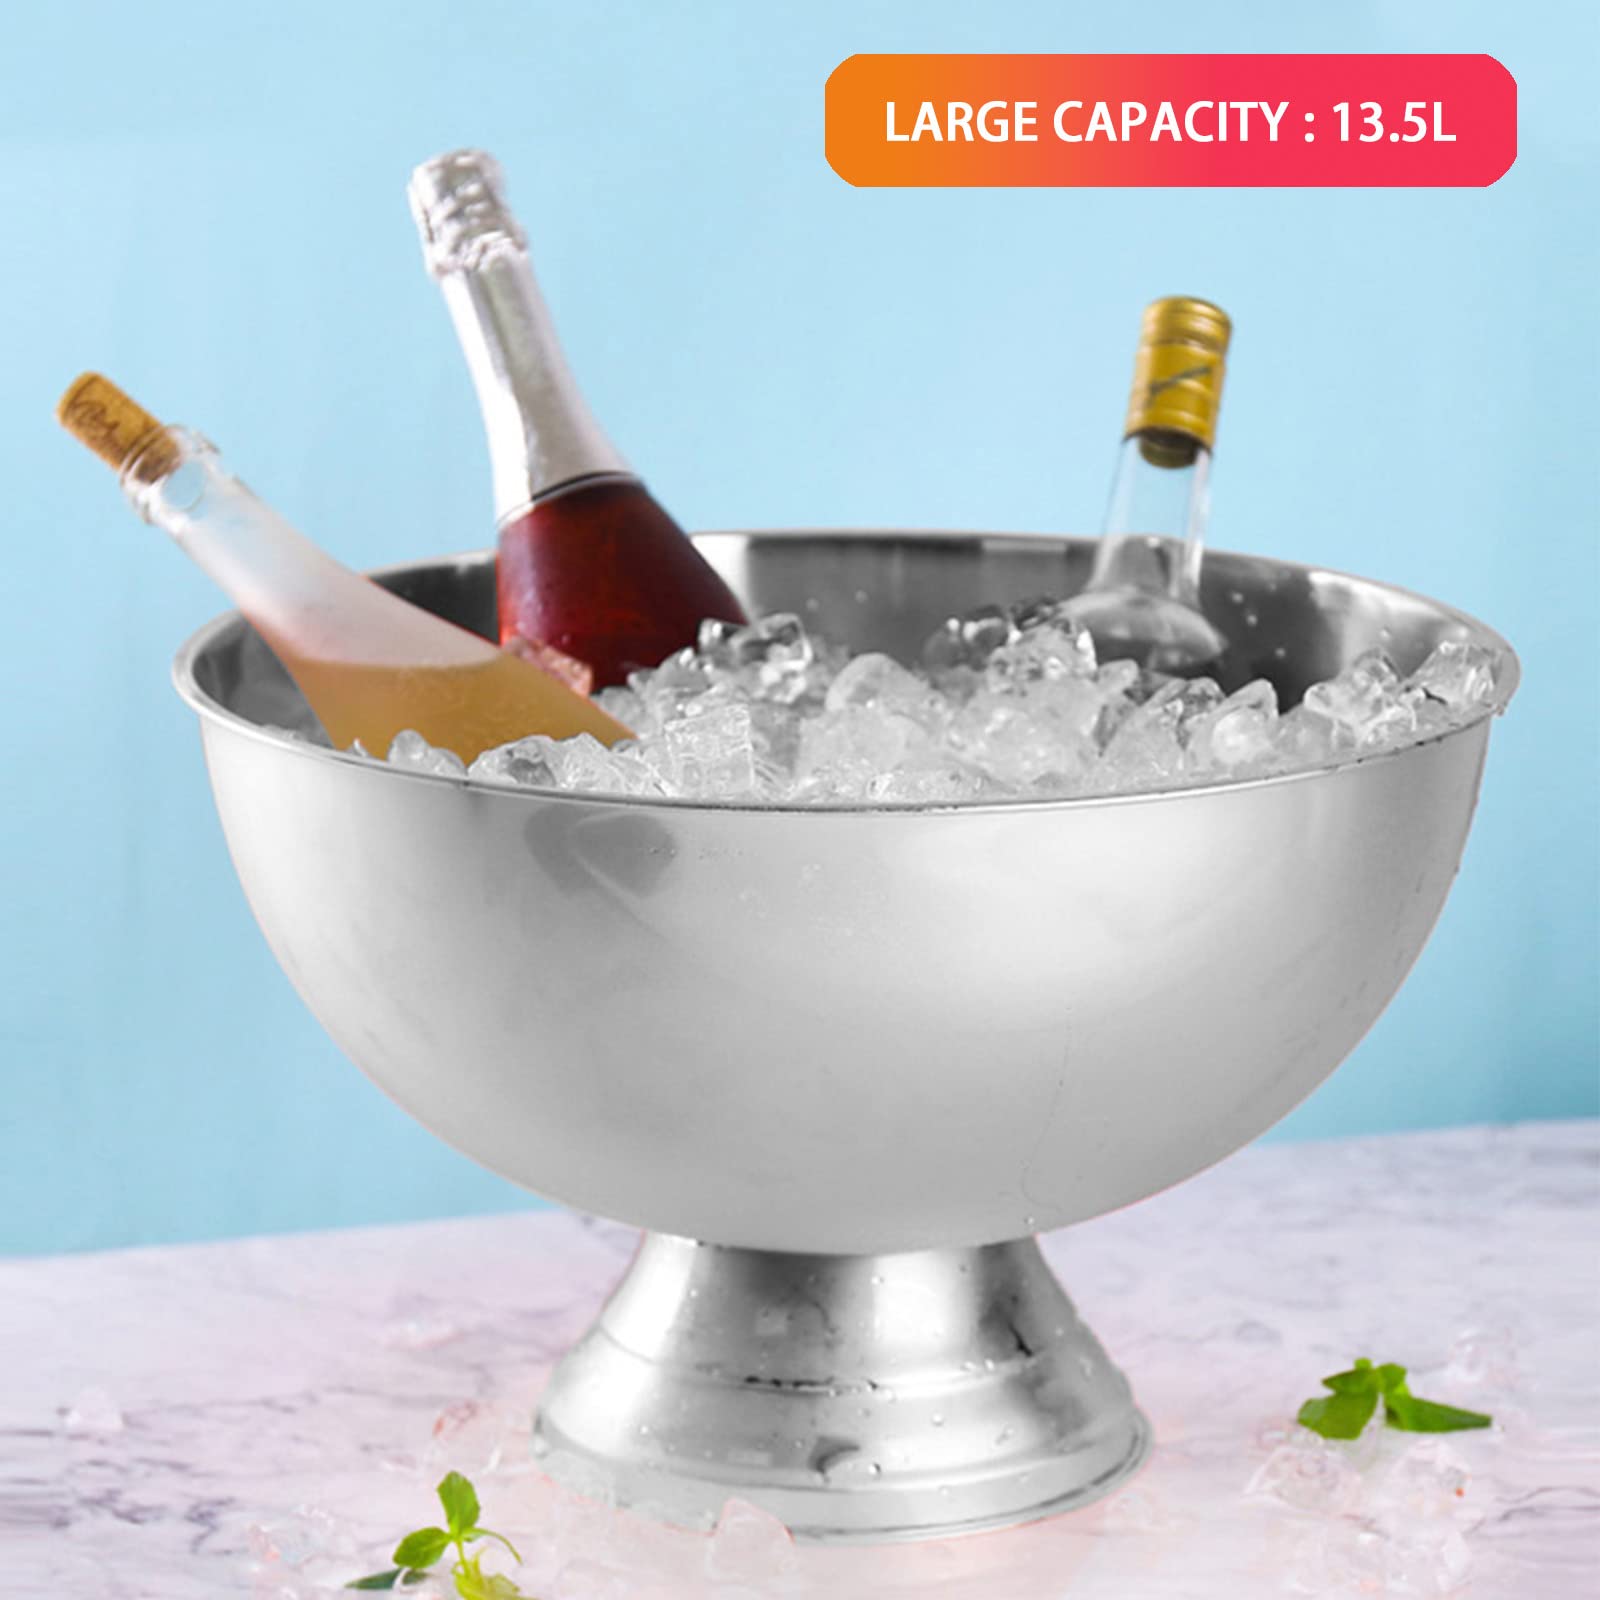 Stainless Steel Champagne Bowl Ice Bucket, Bar Ice Bucket, Large Size Ice Bowl Metal Bar Beer Barrel Champagne Wine Big Ice Bucket for Home Bar - 15.35" x 9.65''